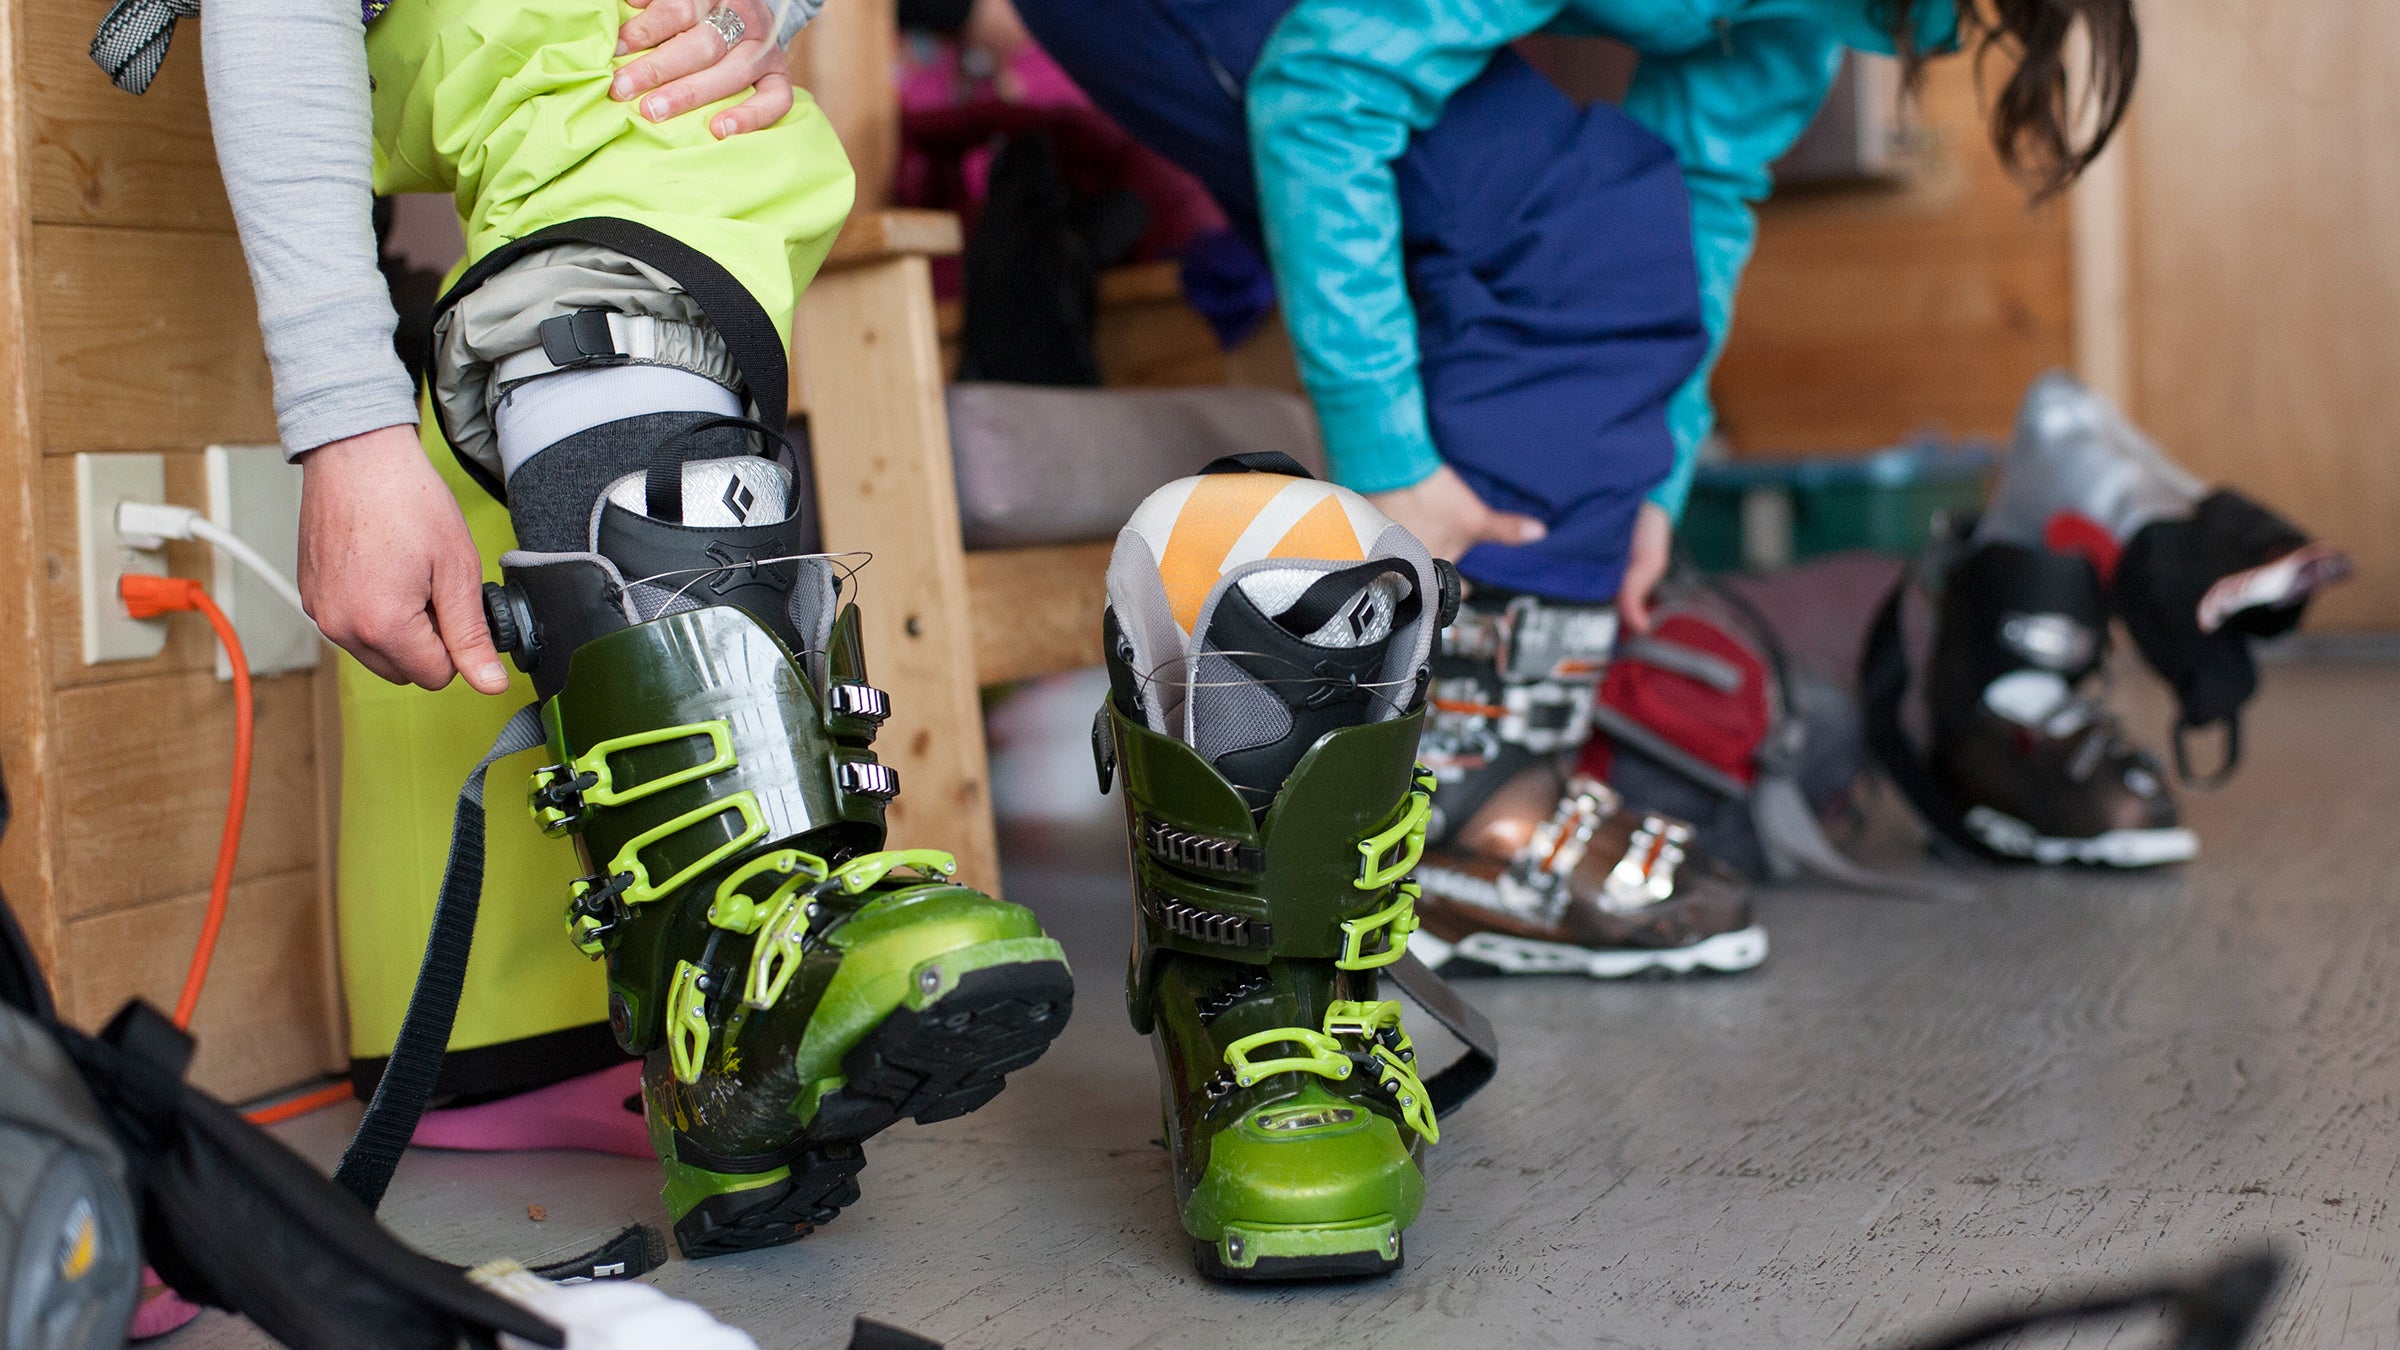 First Time Getting Ski Boots Fitted? Keep These Tips in Mind.